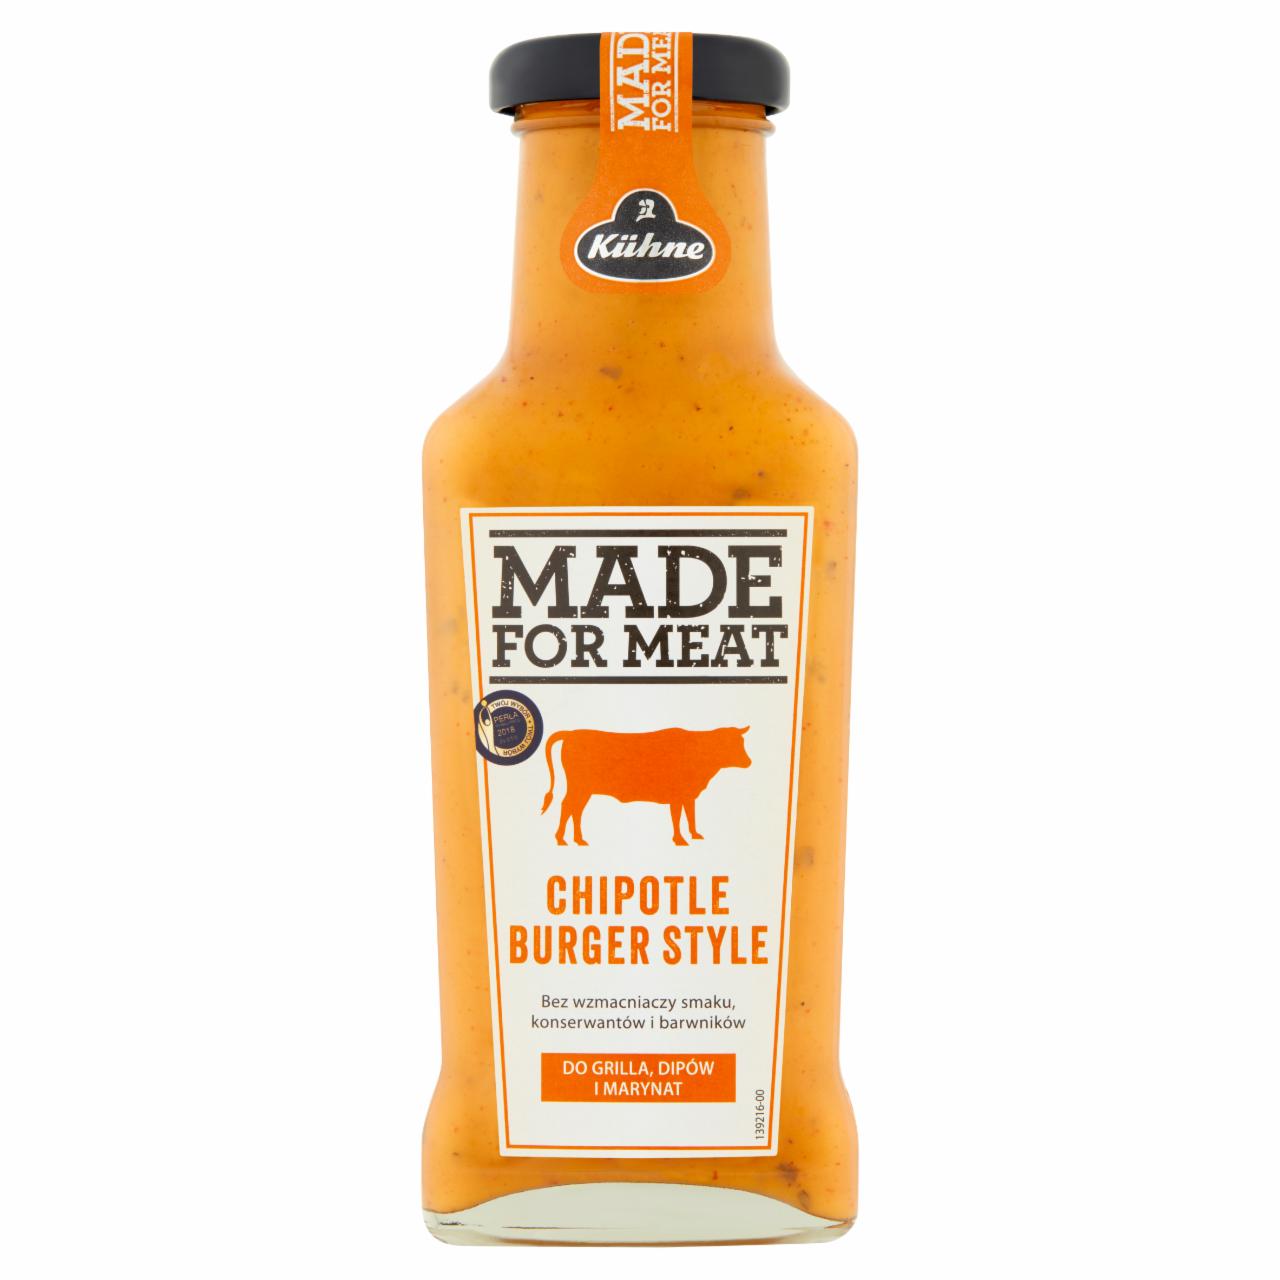 Zdjęcia - Kühne Made For Meat Chipotle Burger Style Sos 235 ml